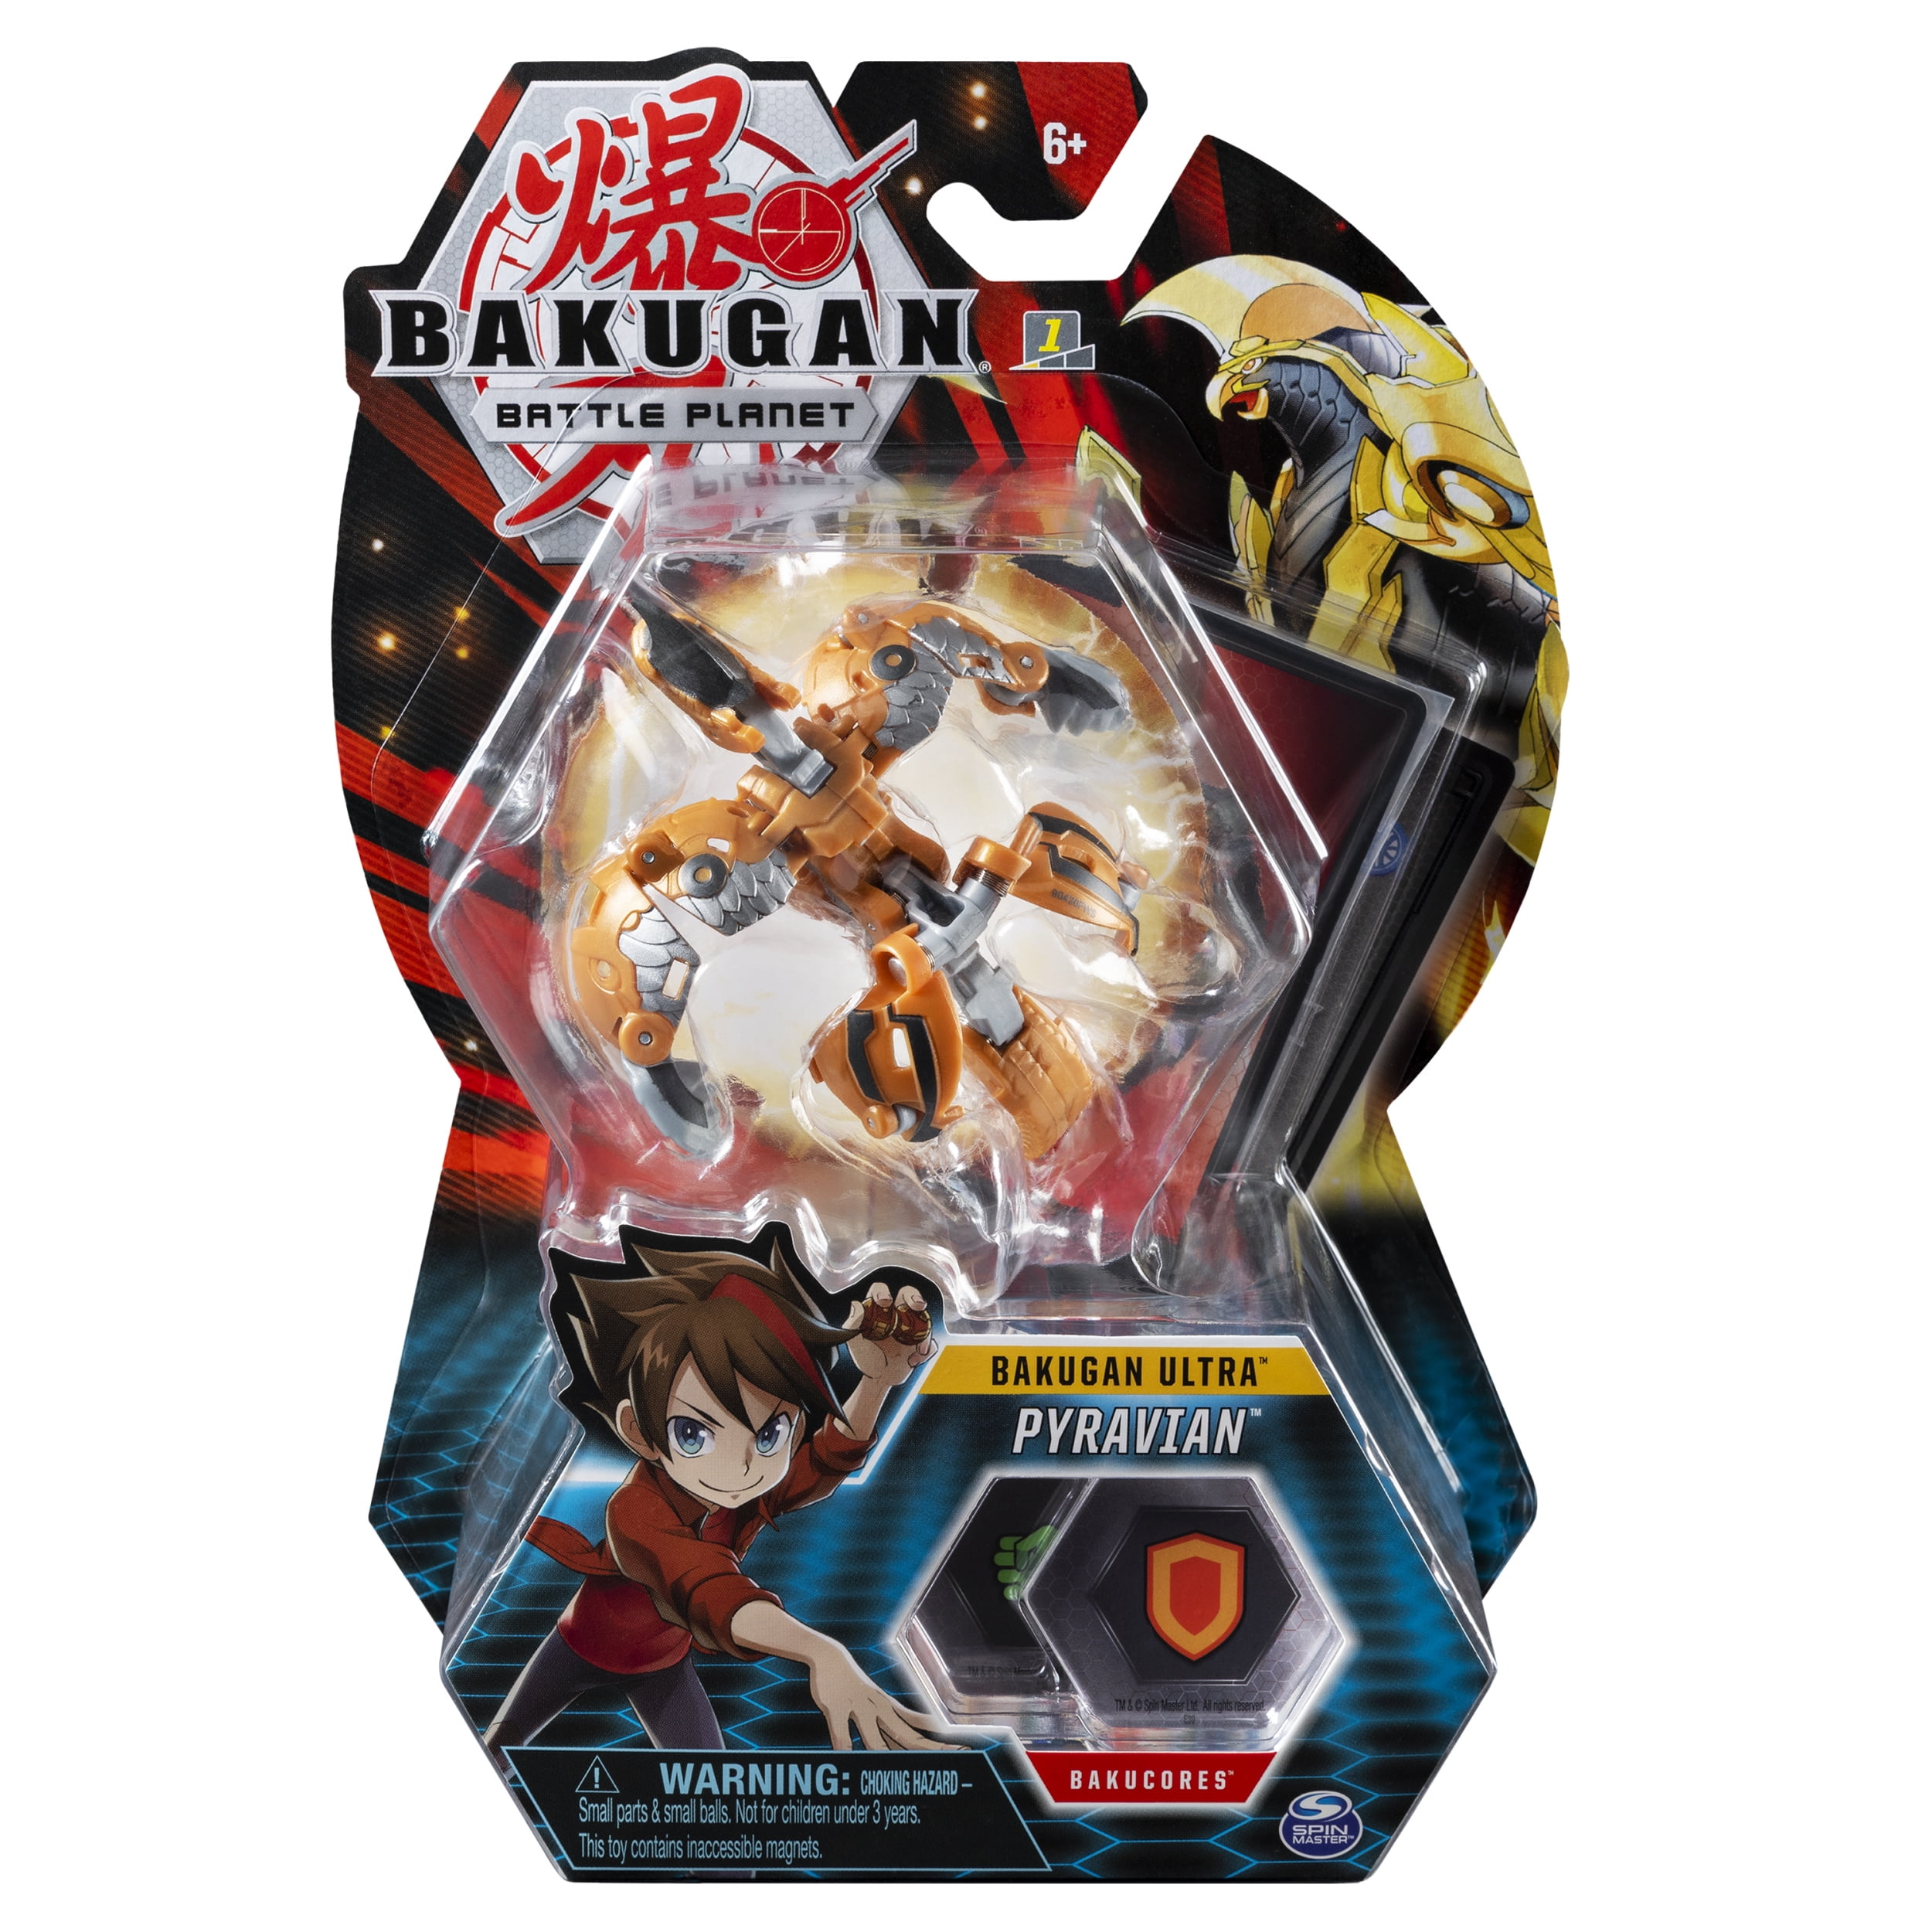 Bakugan Ultra Pyravian 3 Collectible Action Figure and Trading Card